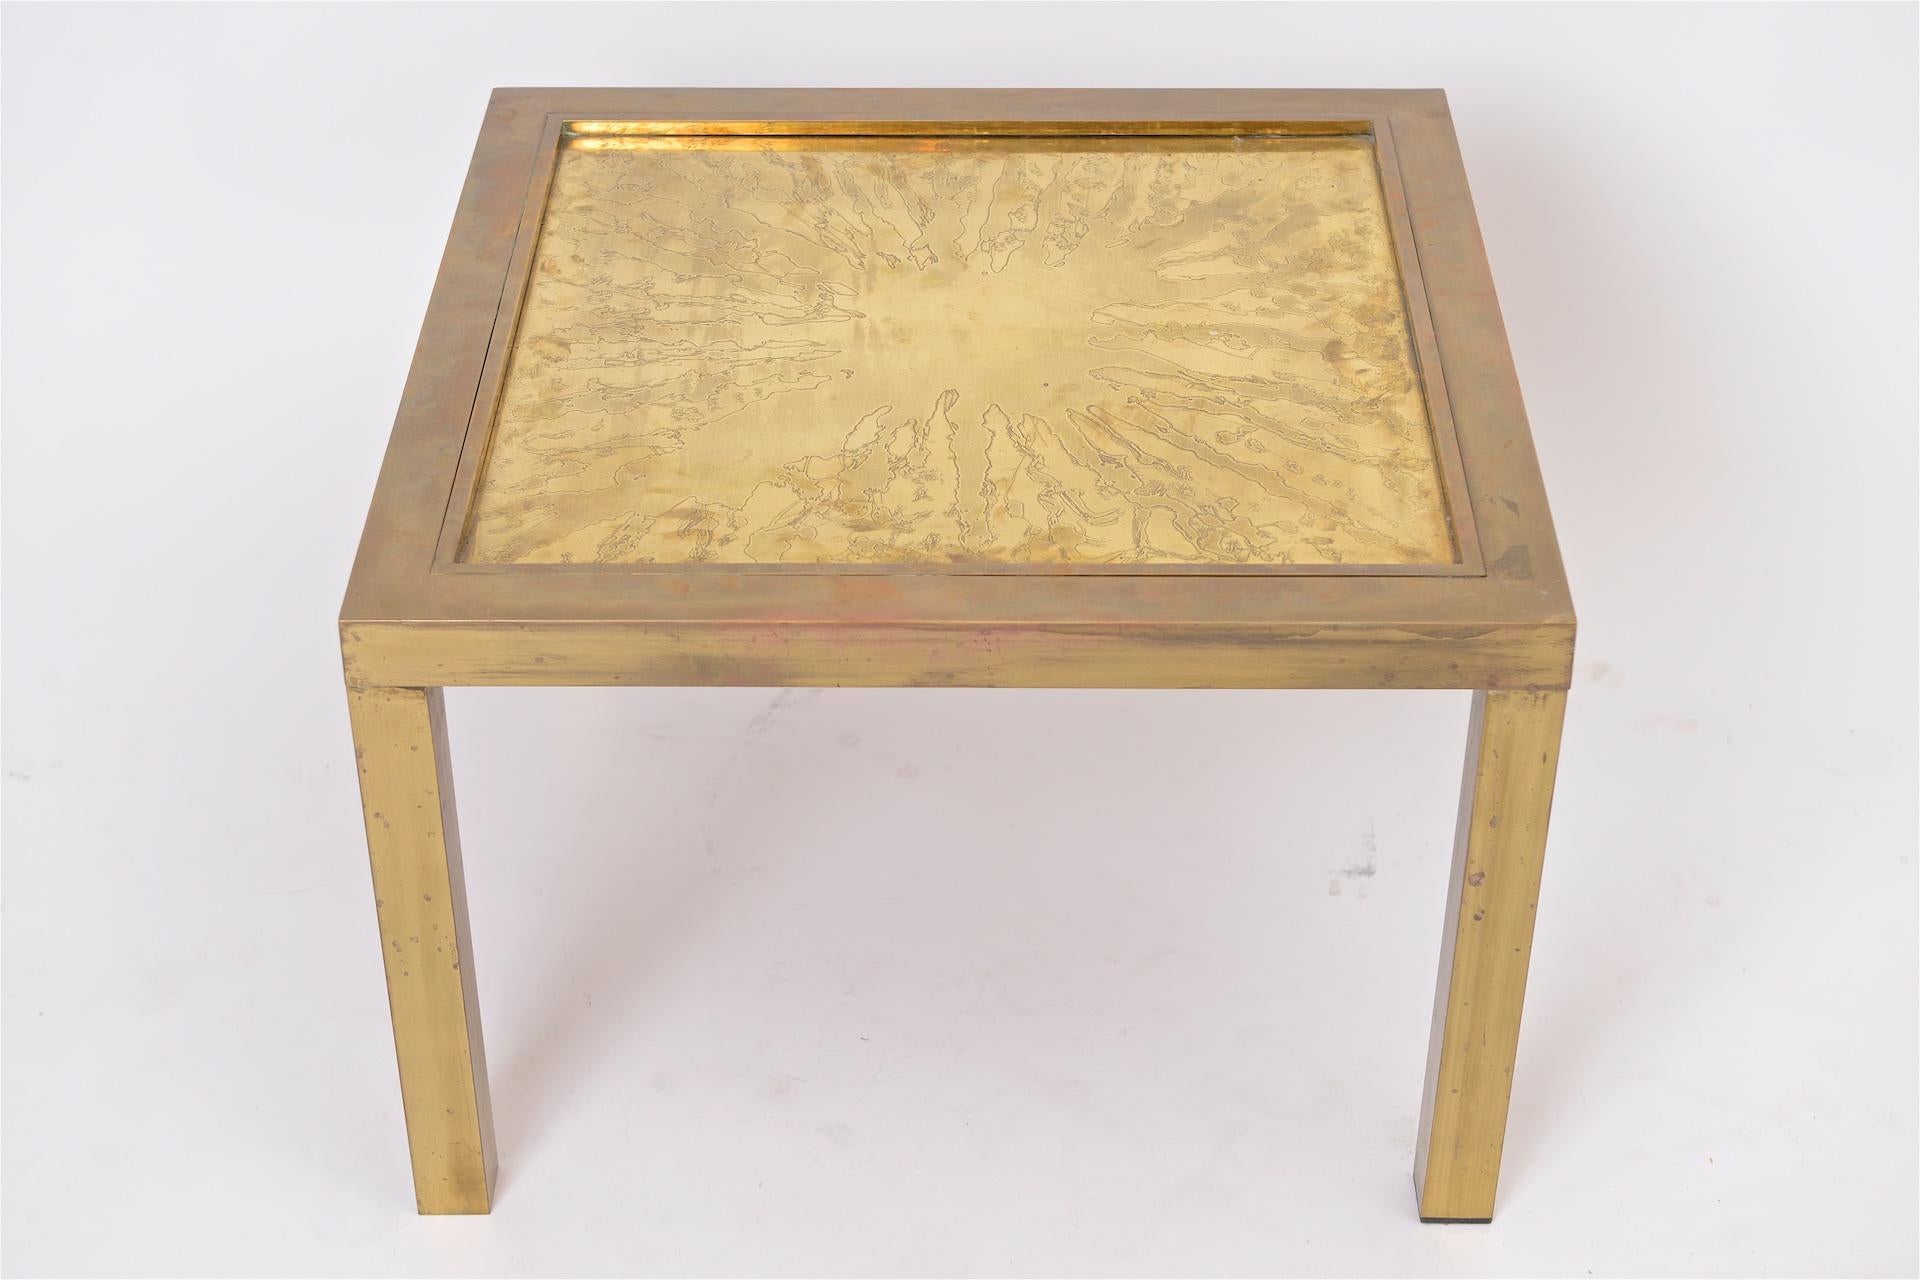 Mid-Century Modern Square Coffee Table For Sale